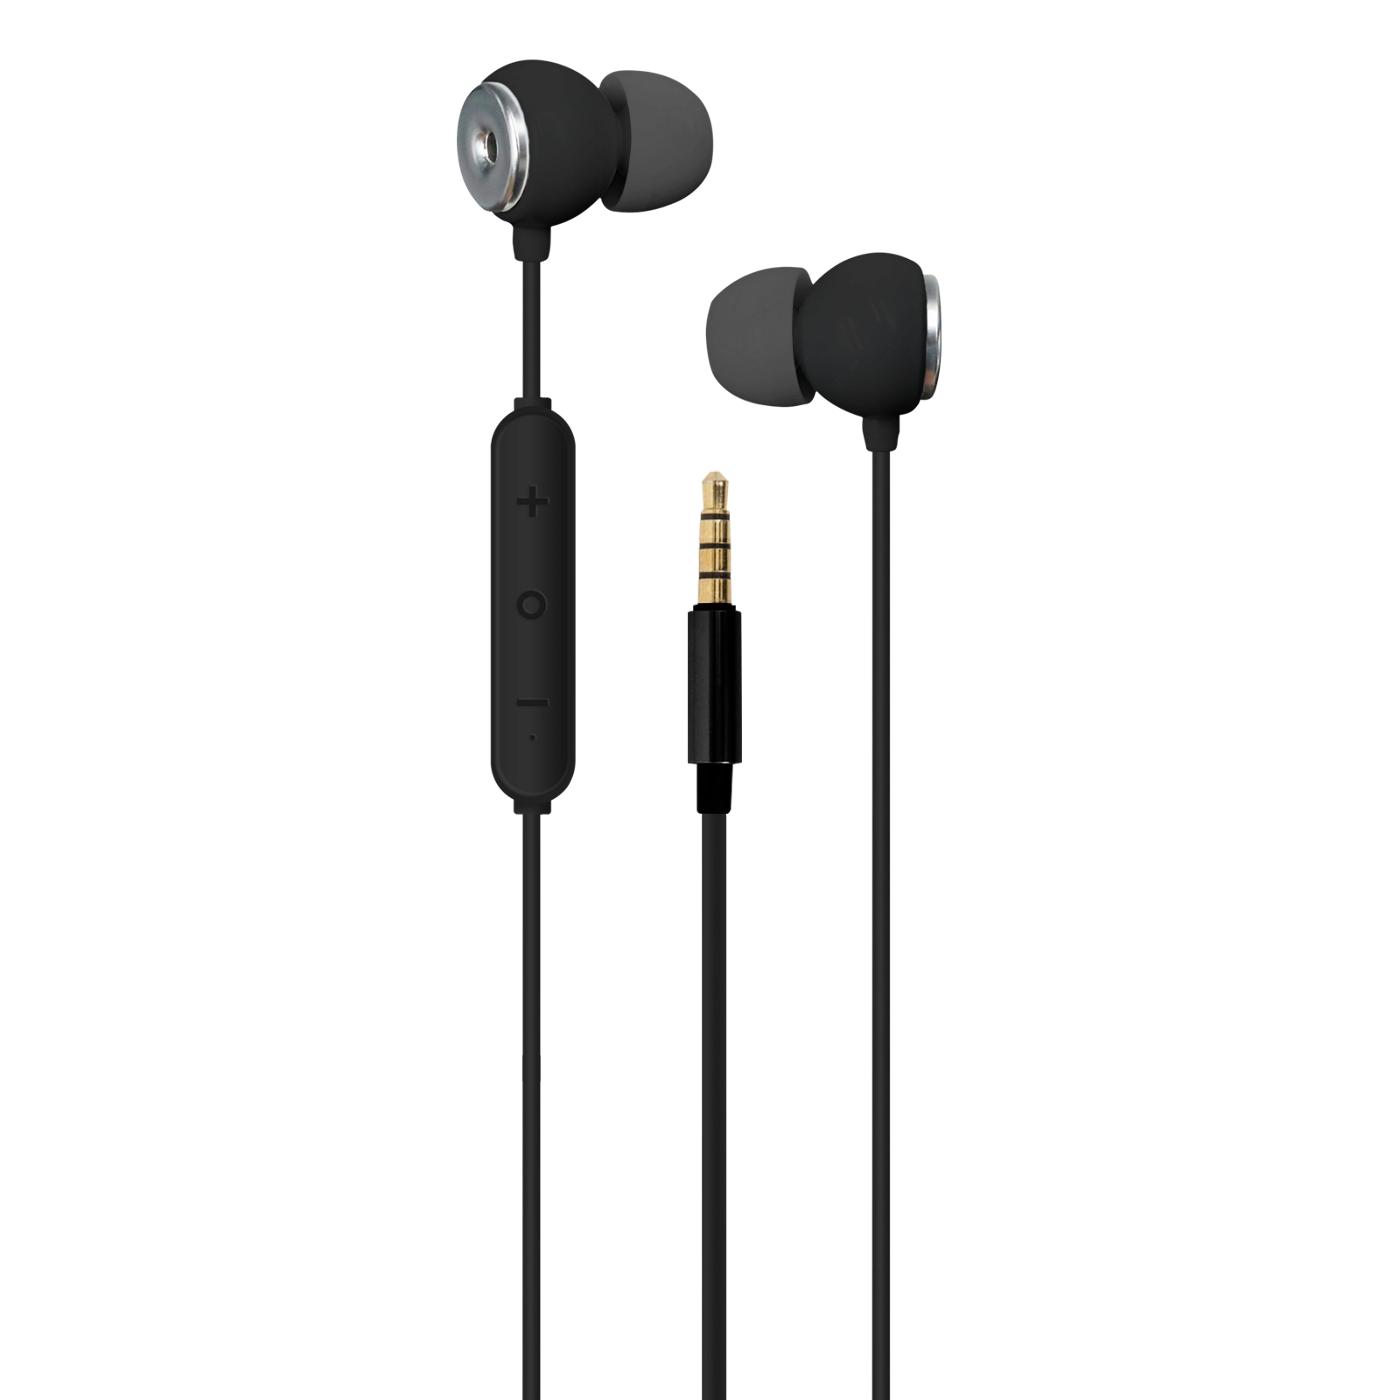 Helix Ultra 3.5mm Aux Earbuds - Black; image 2 of 2